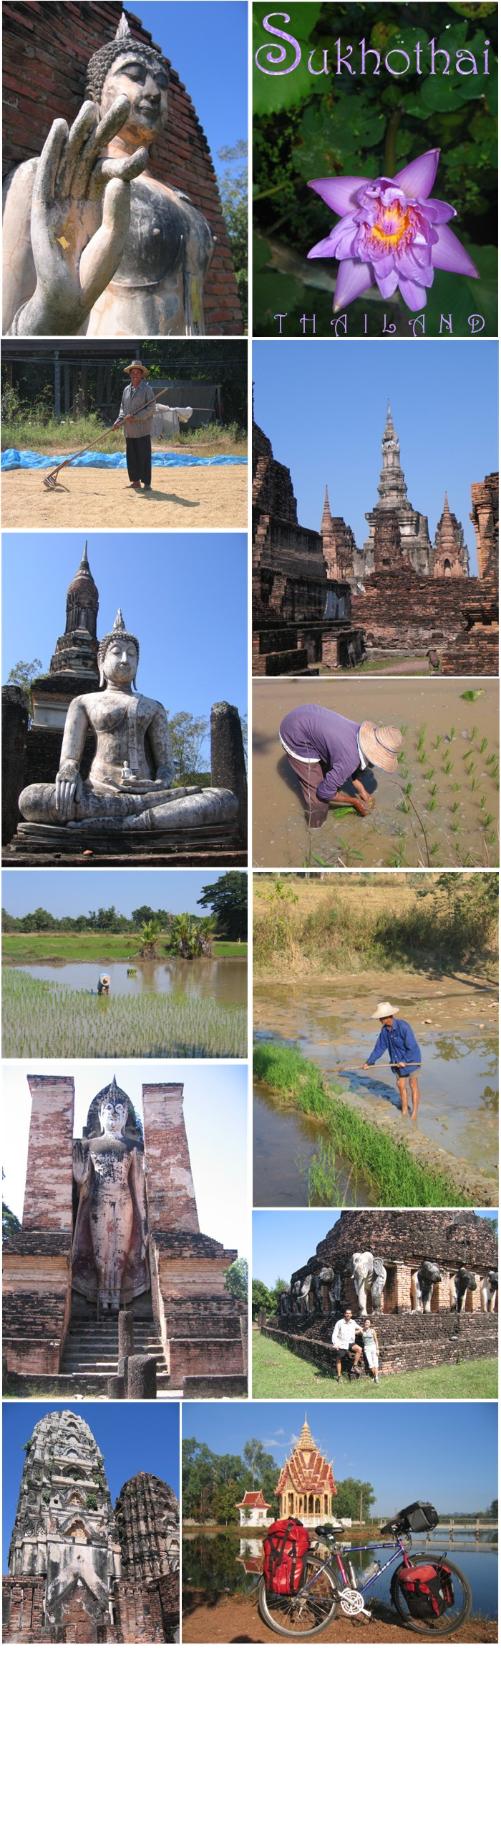 A photo collage of images from Sukhothai, Thailand with several Buddhas and rice cultivating farmers.